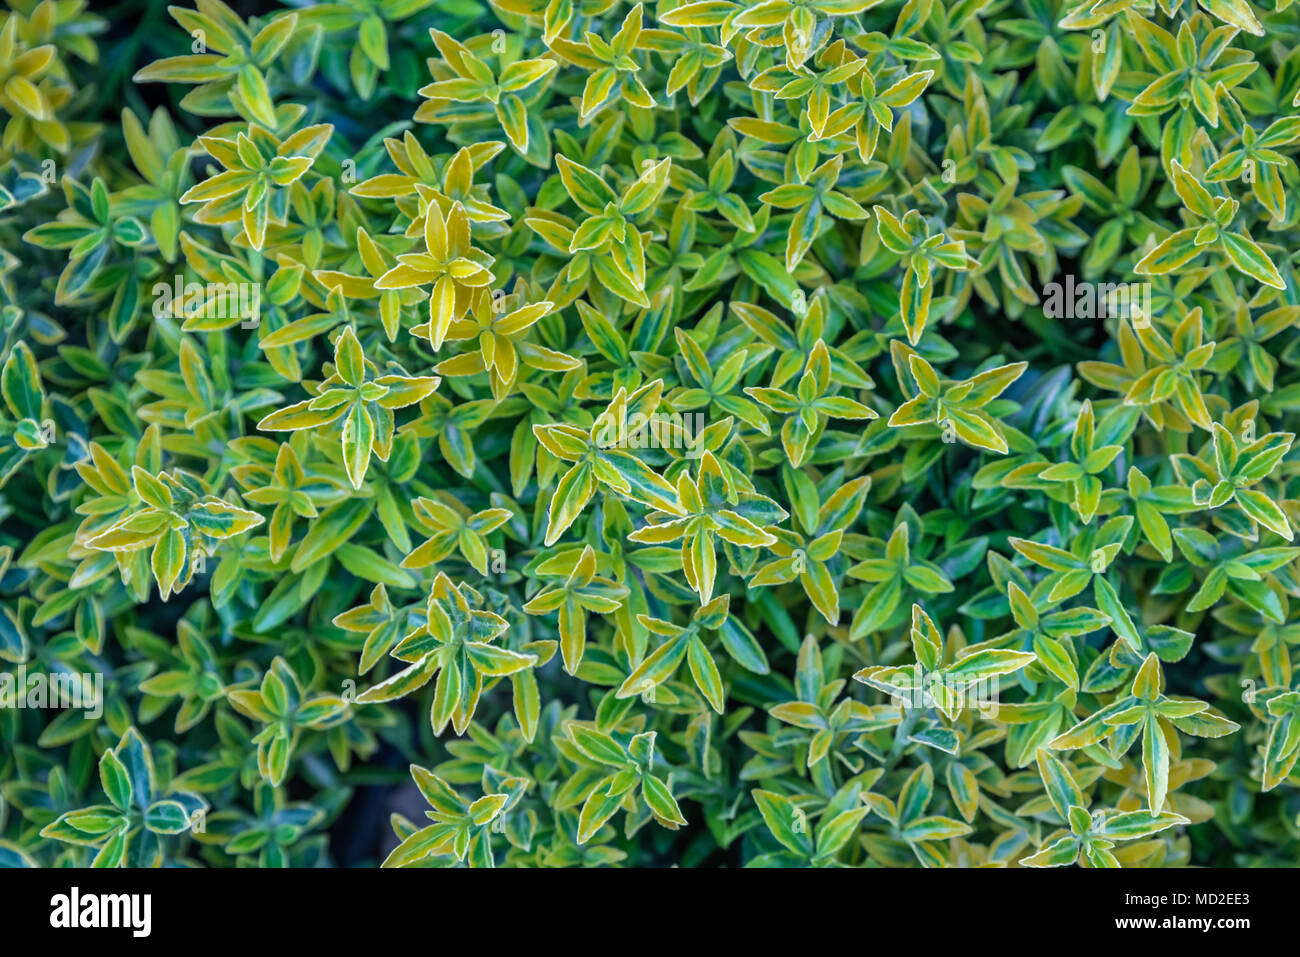 Top view of green and gold color Euonymus fortunei,yellow and green leaves of euonymus fortunei in plastic pots for sale Stock Photo